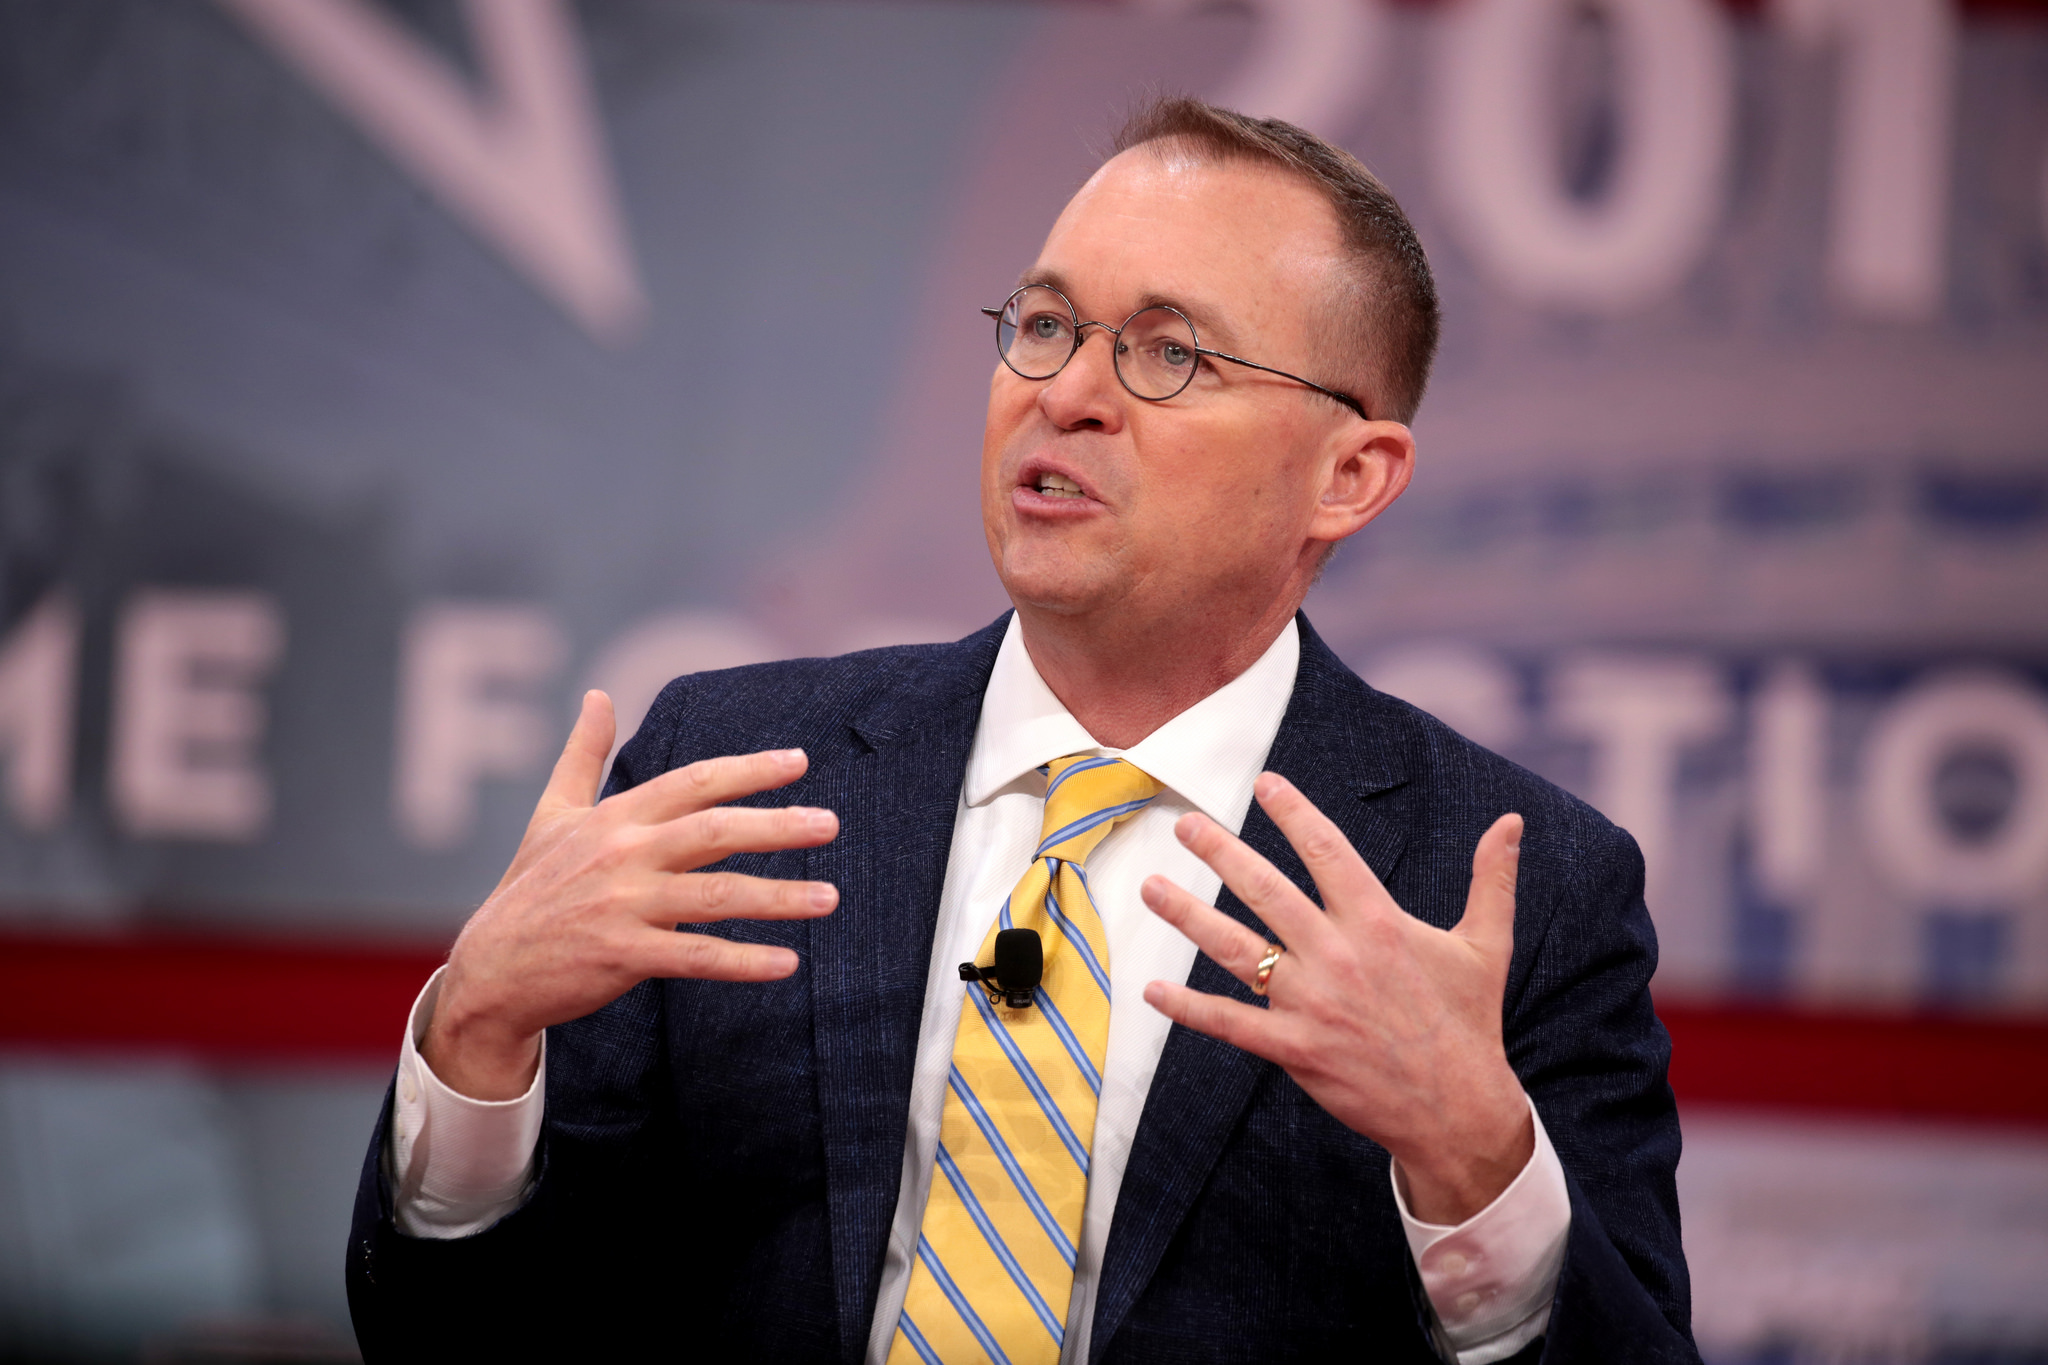 Mick Mulvaney speaking at the 2018 Conservative Political Action Conference in National Harbor, Maryland. (Photo by Gage Skidmore)